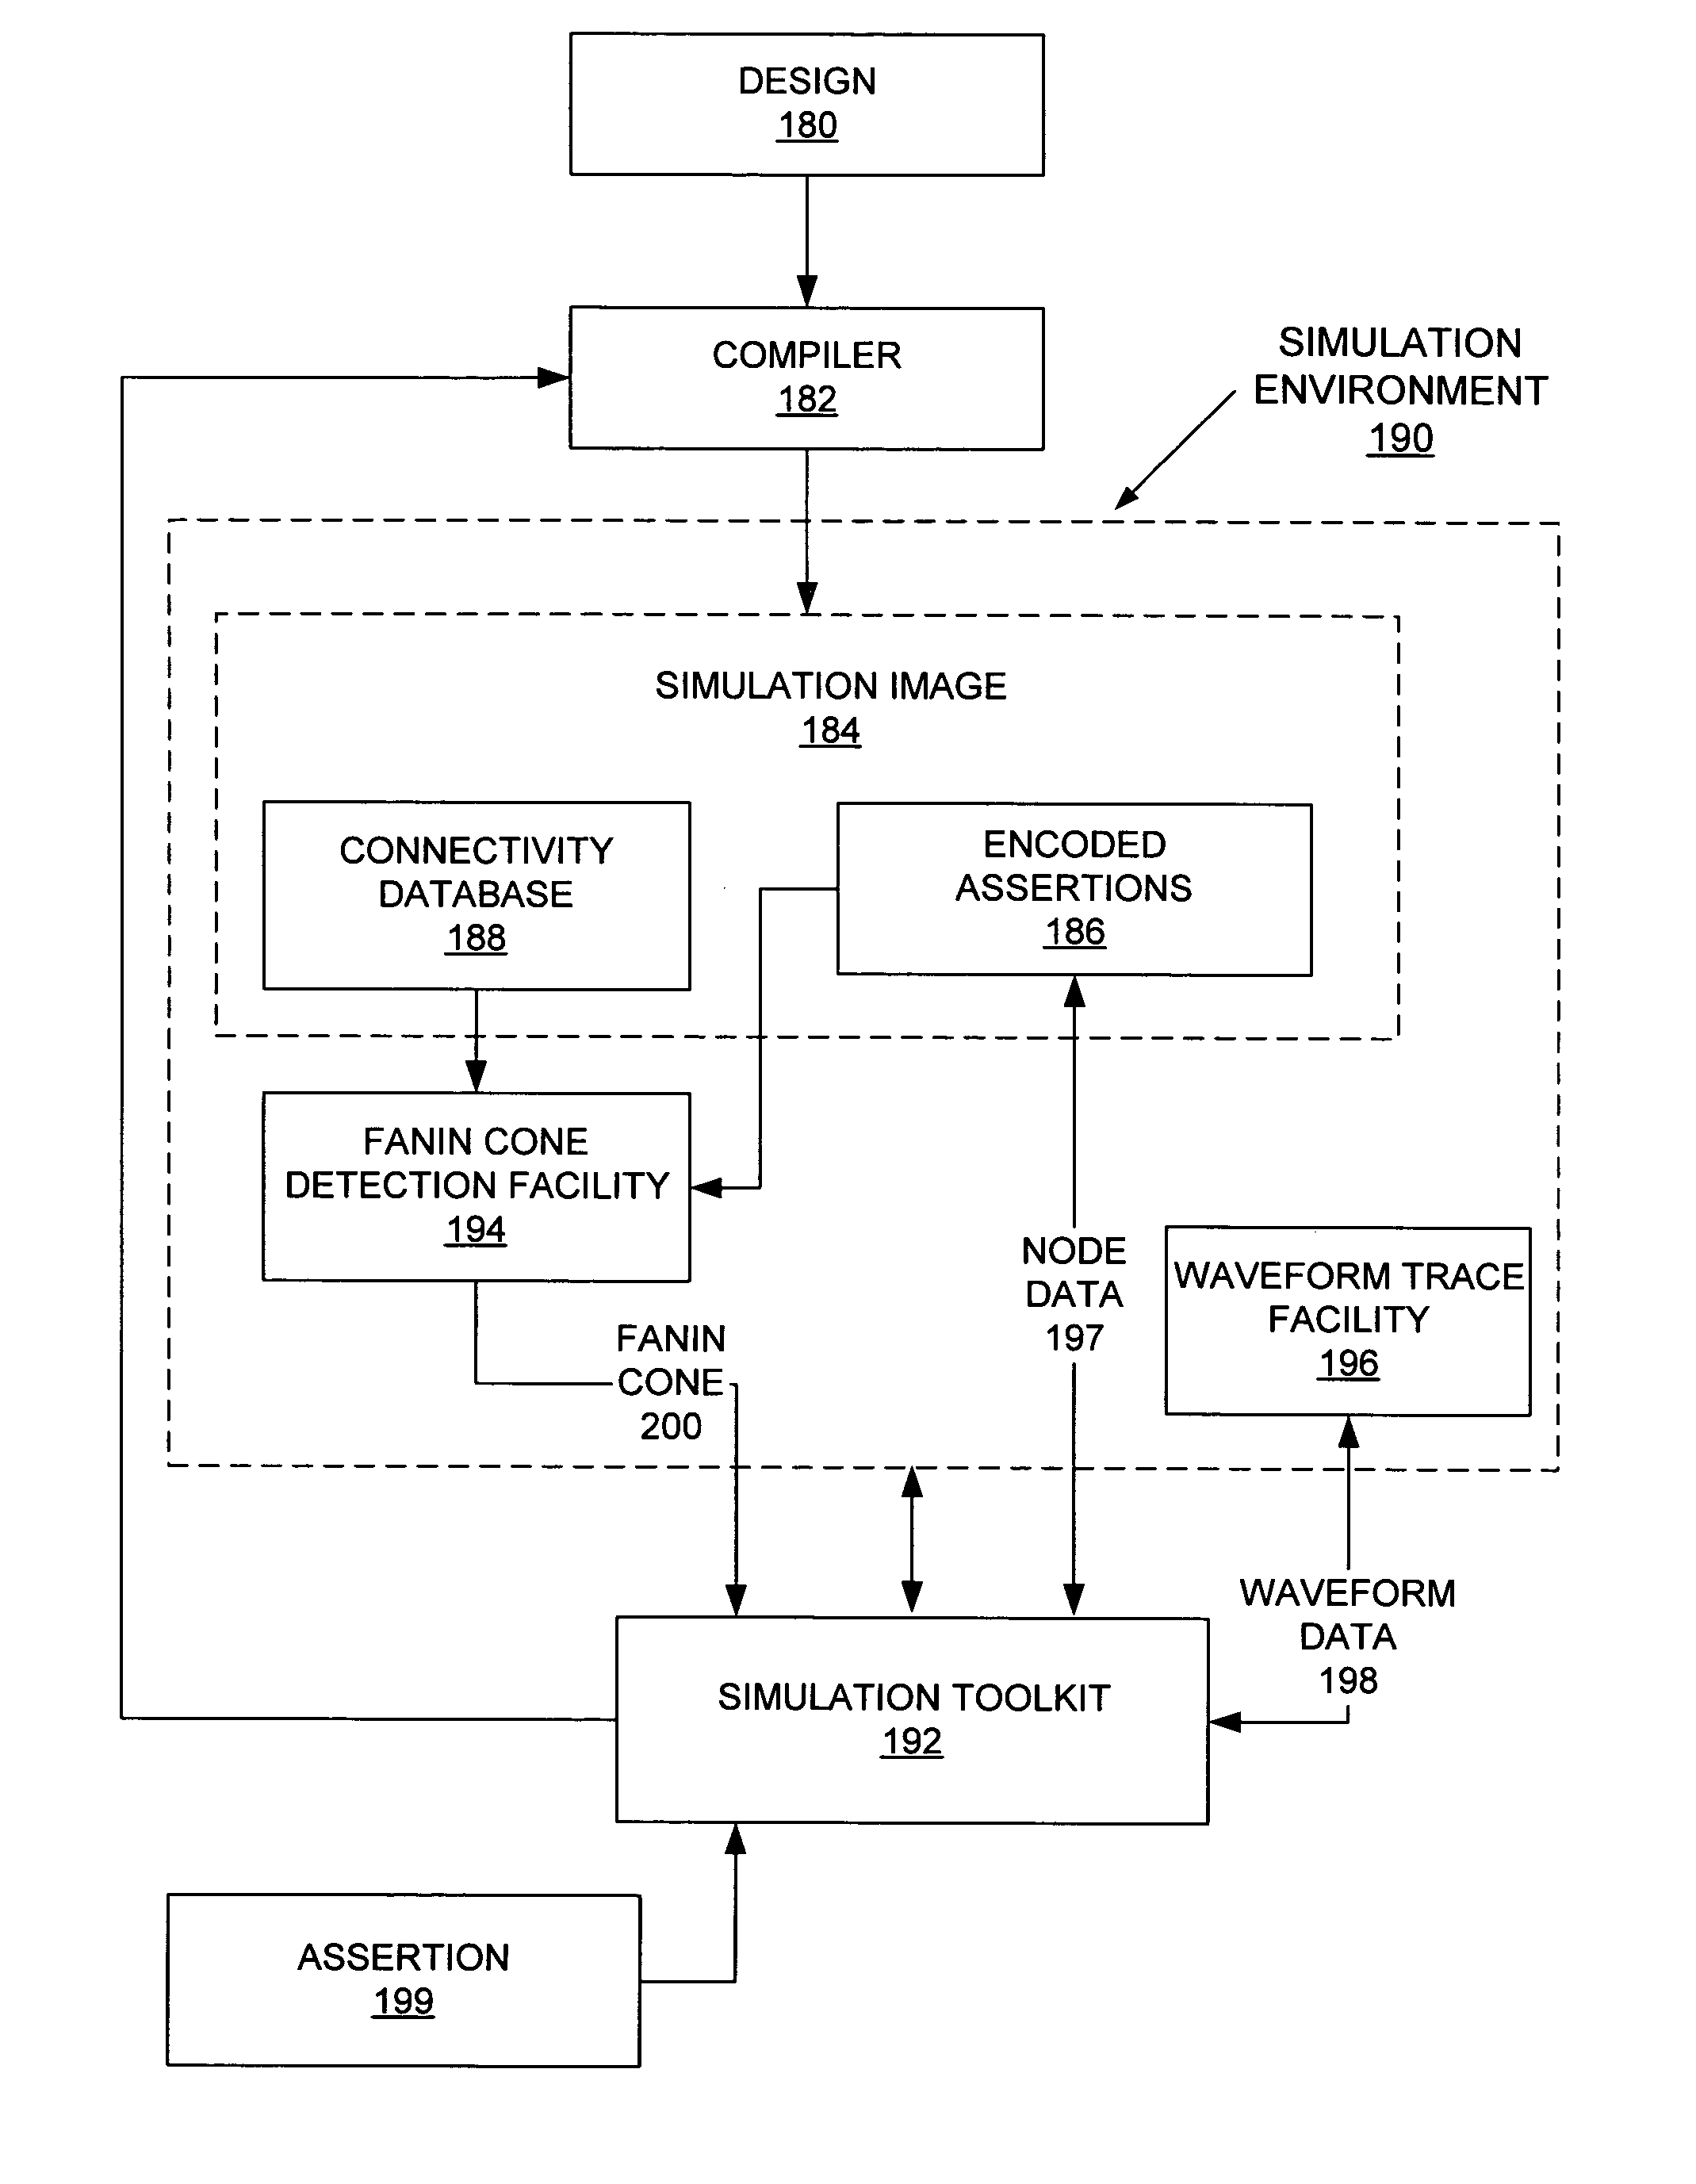 Method and apparatus for generating minimal node data and dynamic assertions for a simulation